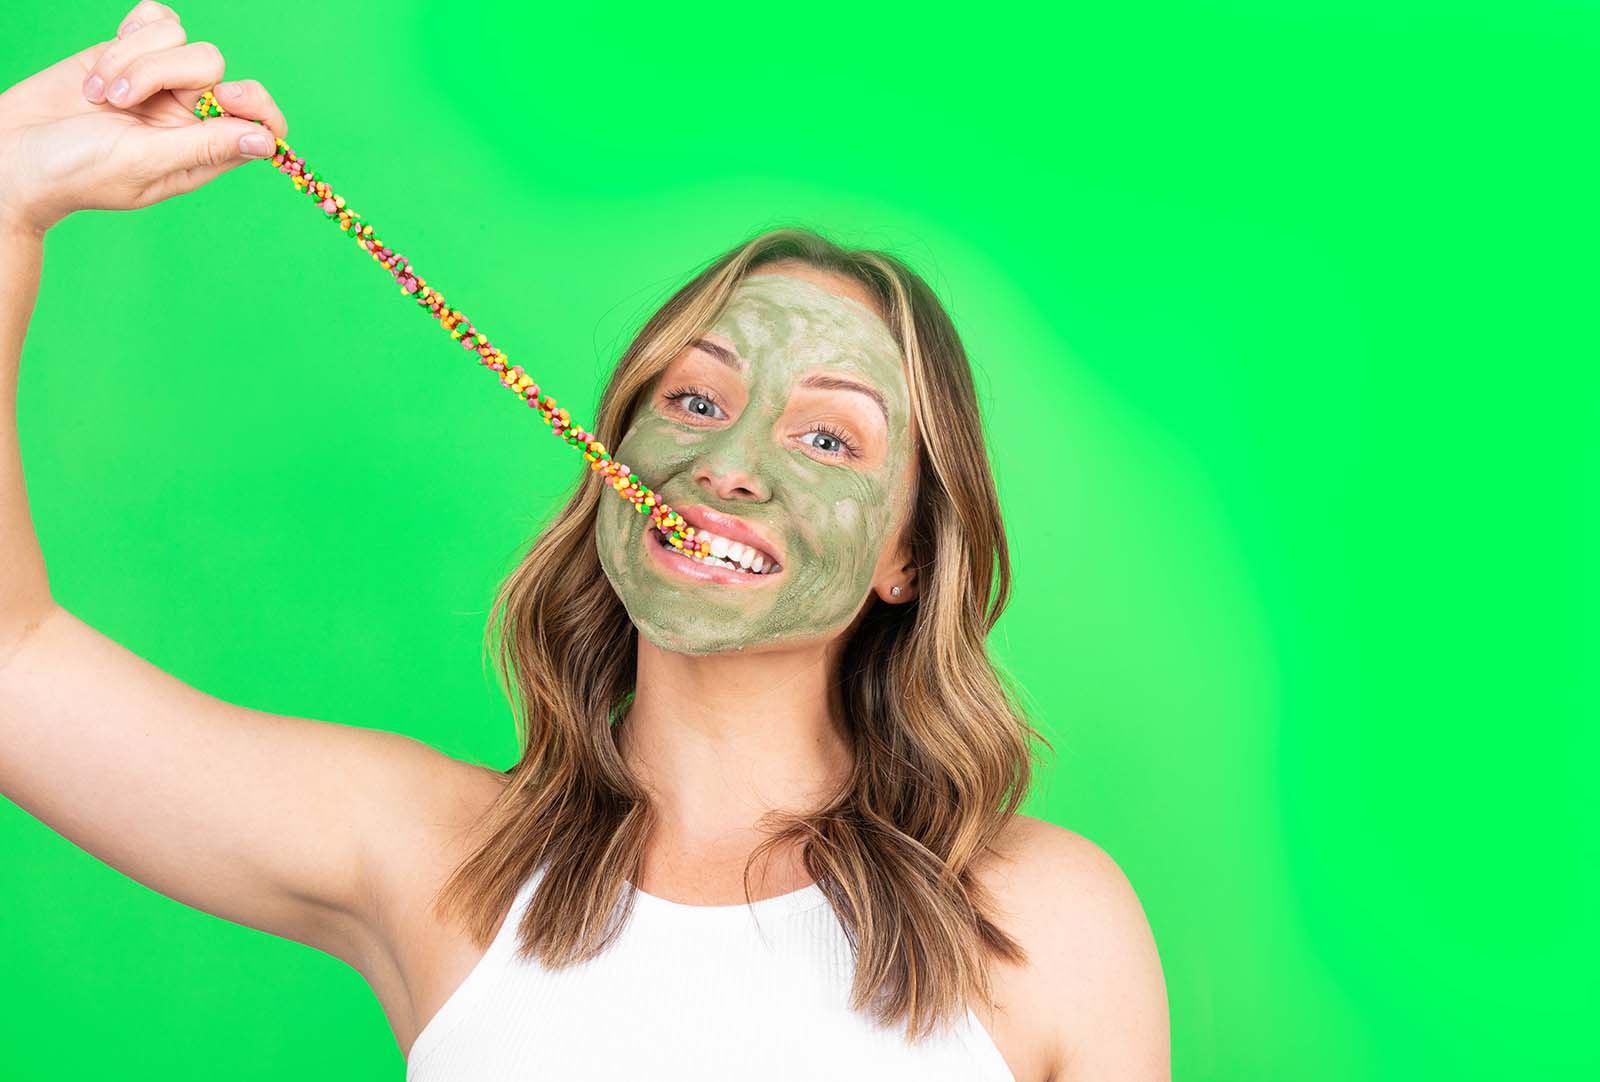 Bold lifestyle product photos for a clay mask brand. Styled product photos by Megzie Makes